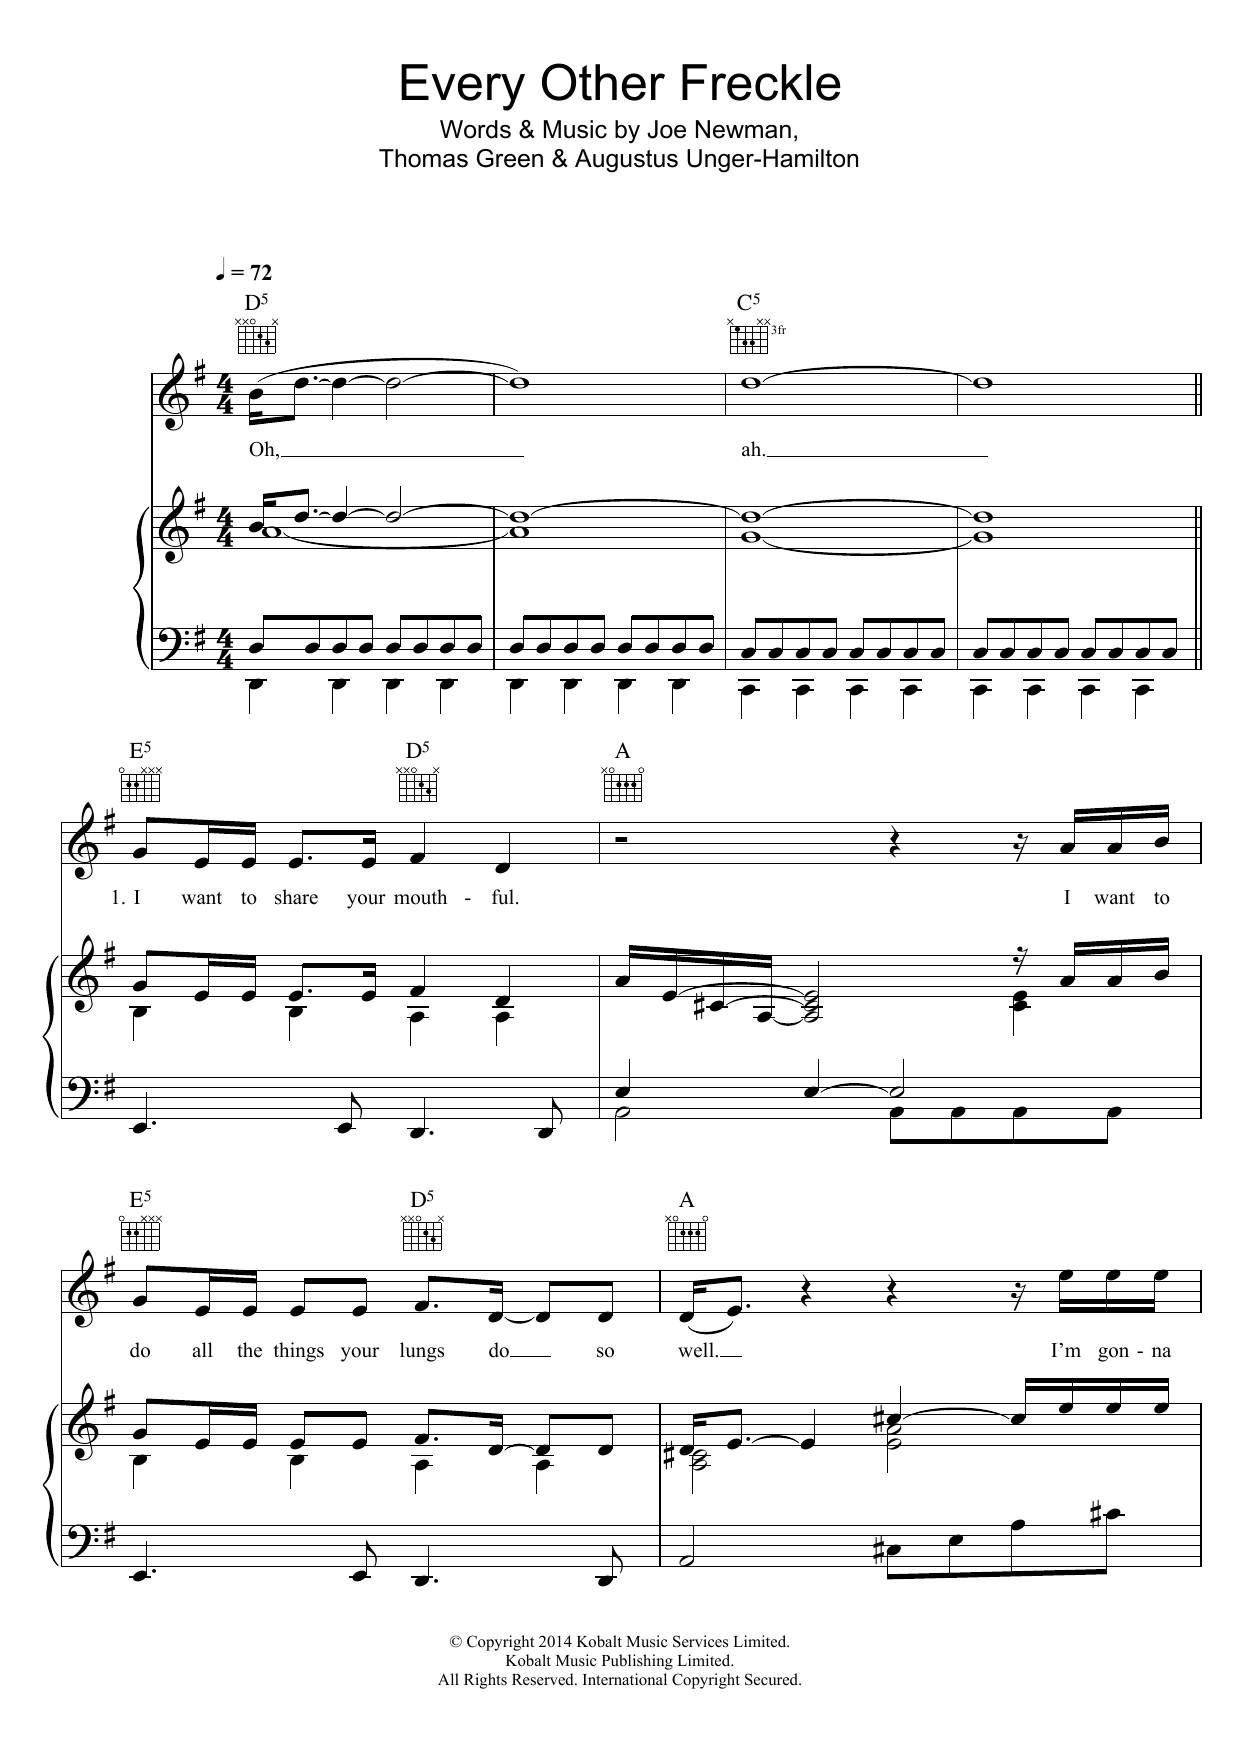 Download Alt-J Every Other Freckle Sheet Music